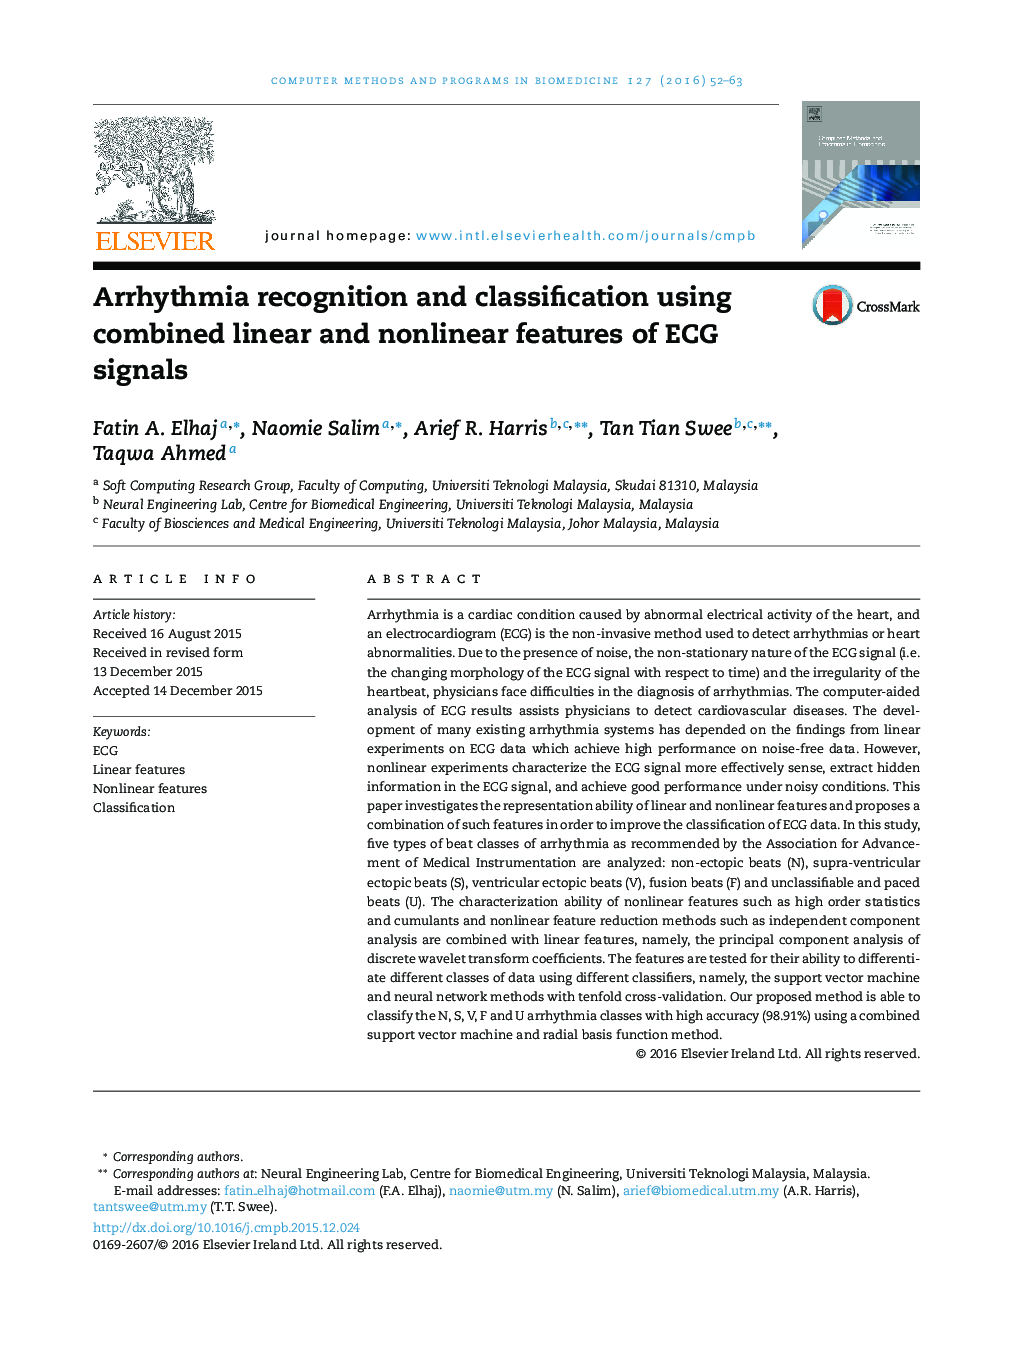 Arrhythmia recognition and classification using combined linear and nonlinear features of ECG signals